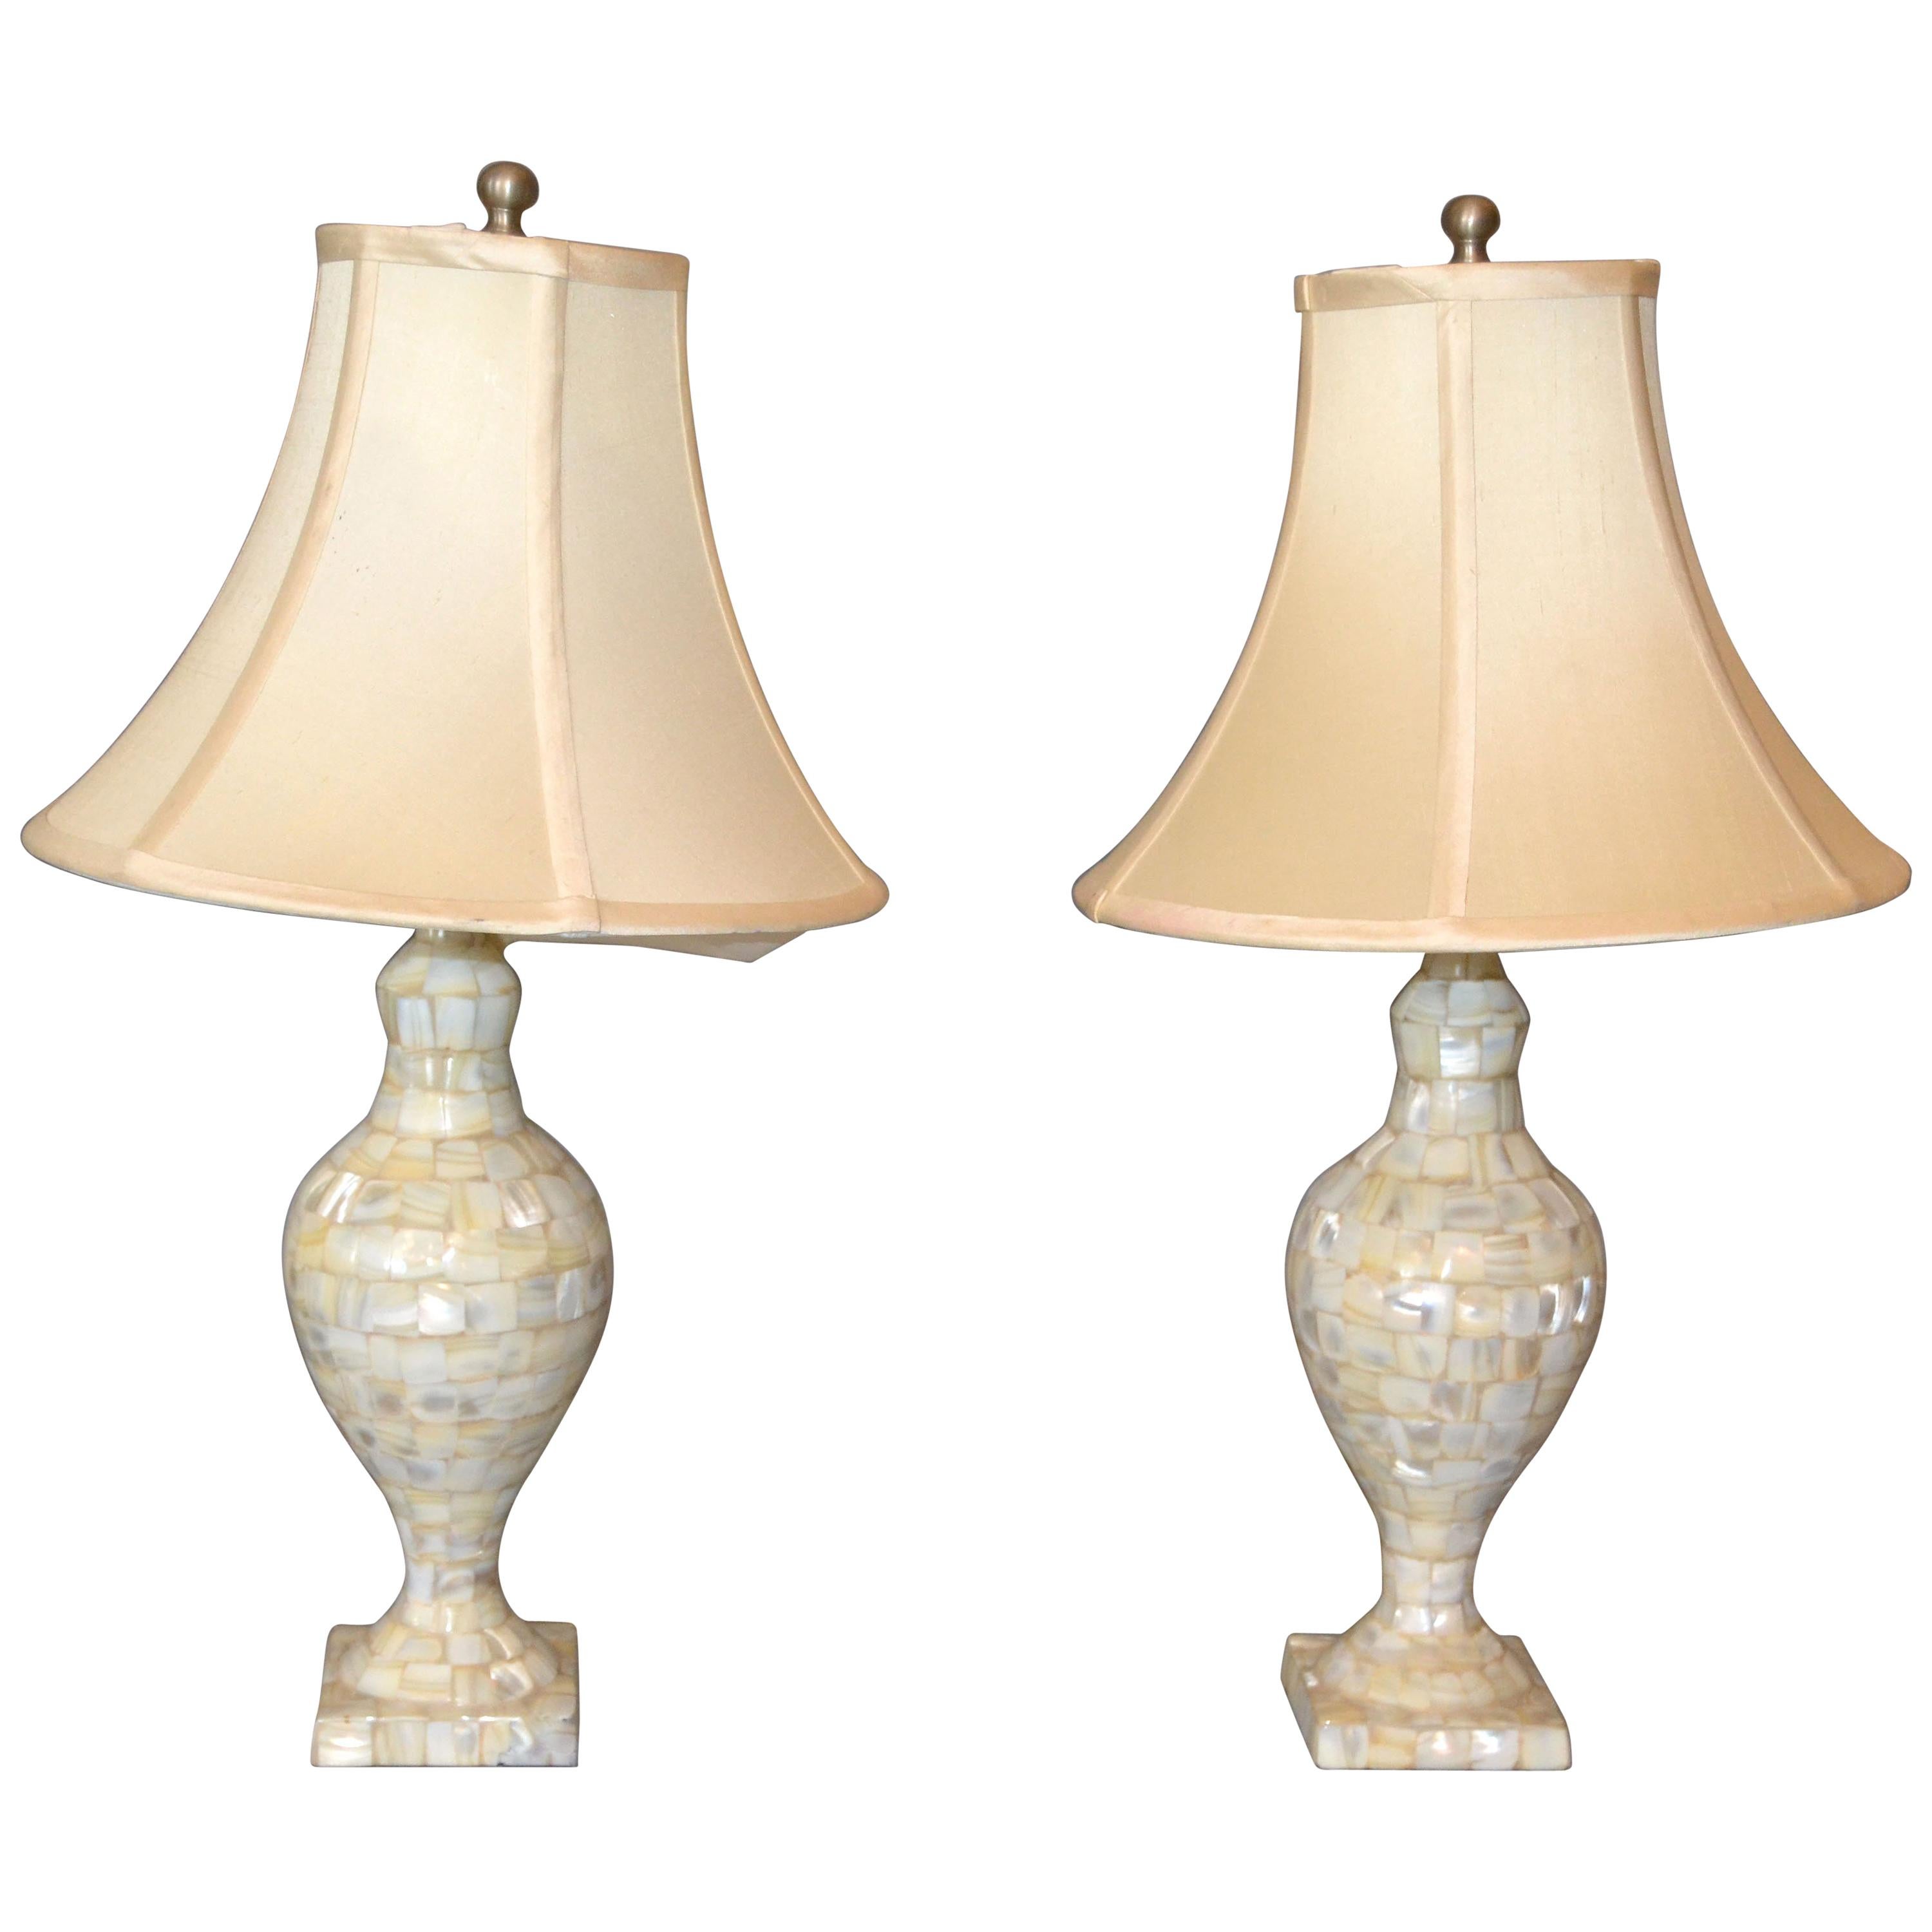 Pair, Hollywood Regency Vintage Capiz Shell Table Lamps with Shades